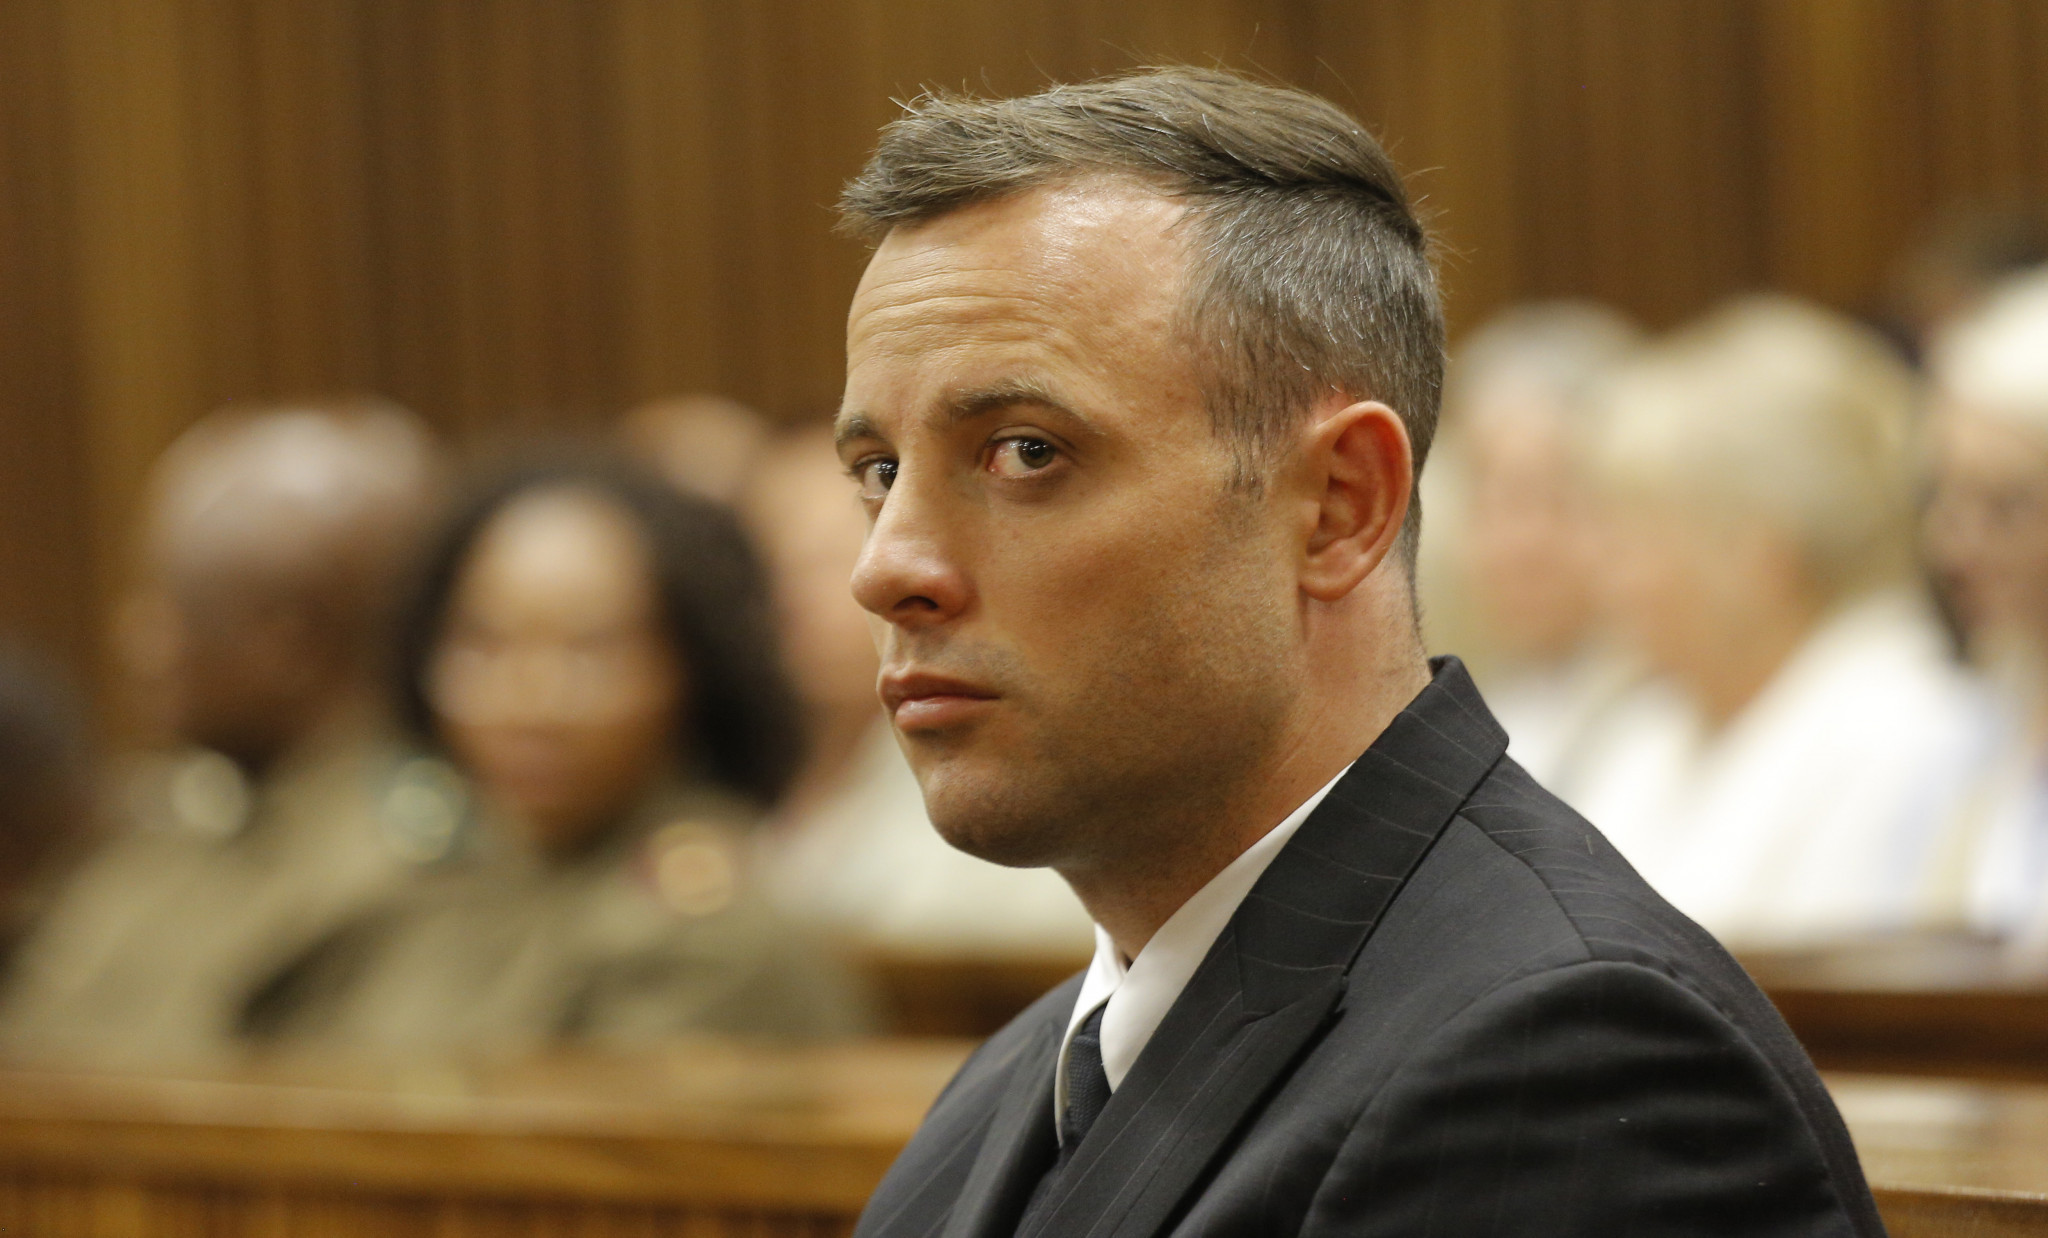 Oscar Pistorius is currently serving a 13-year jail sentence for the murder of his former girlfriend Reeva Steenkamp ©Getty Images